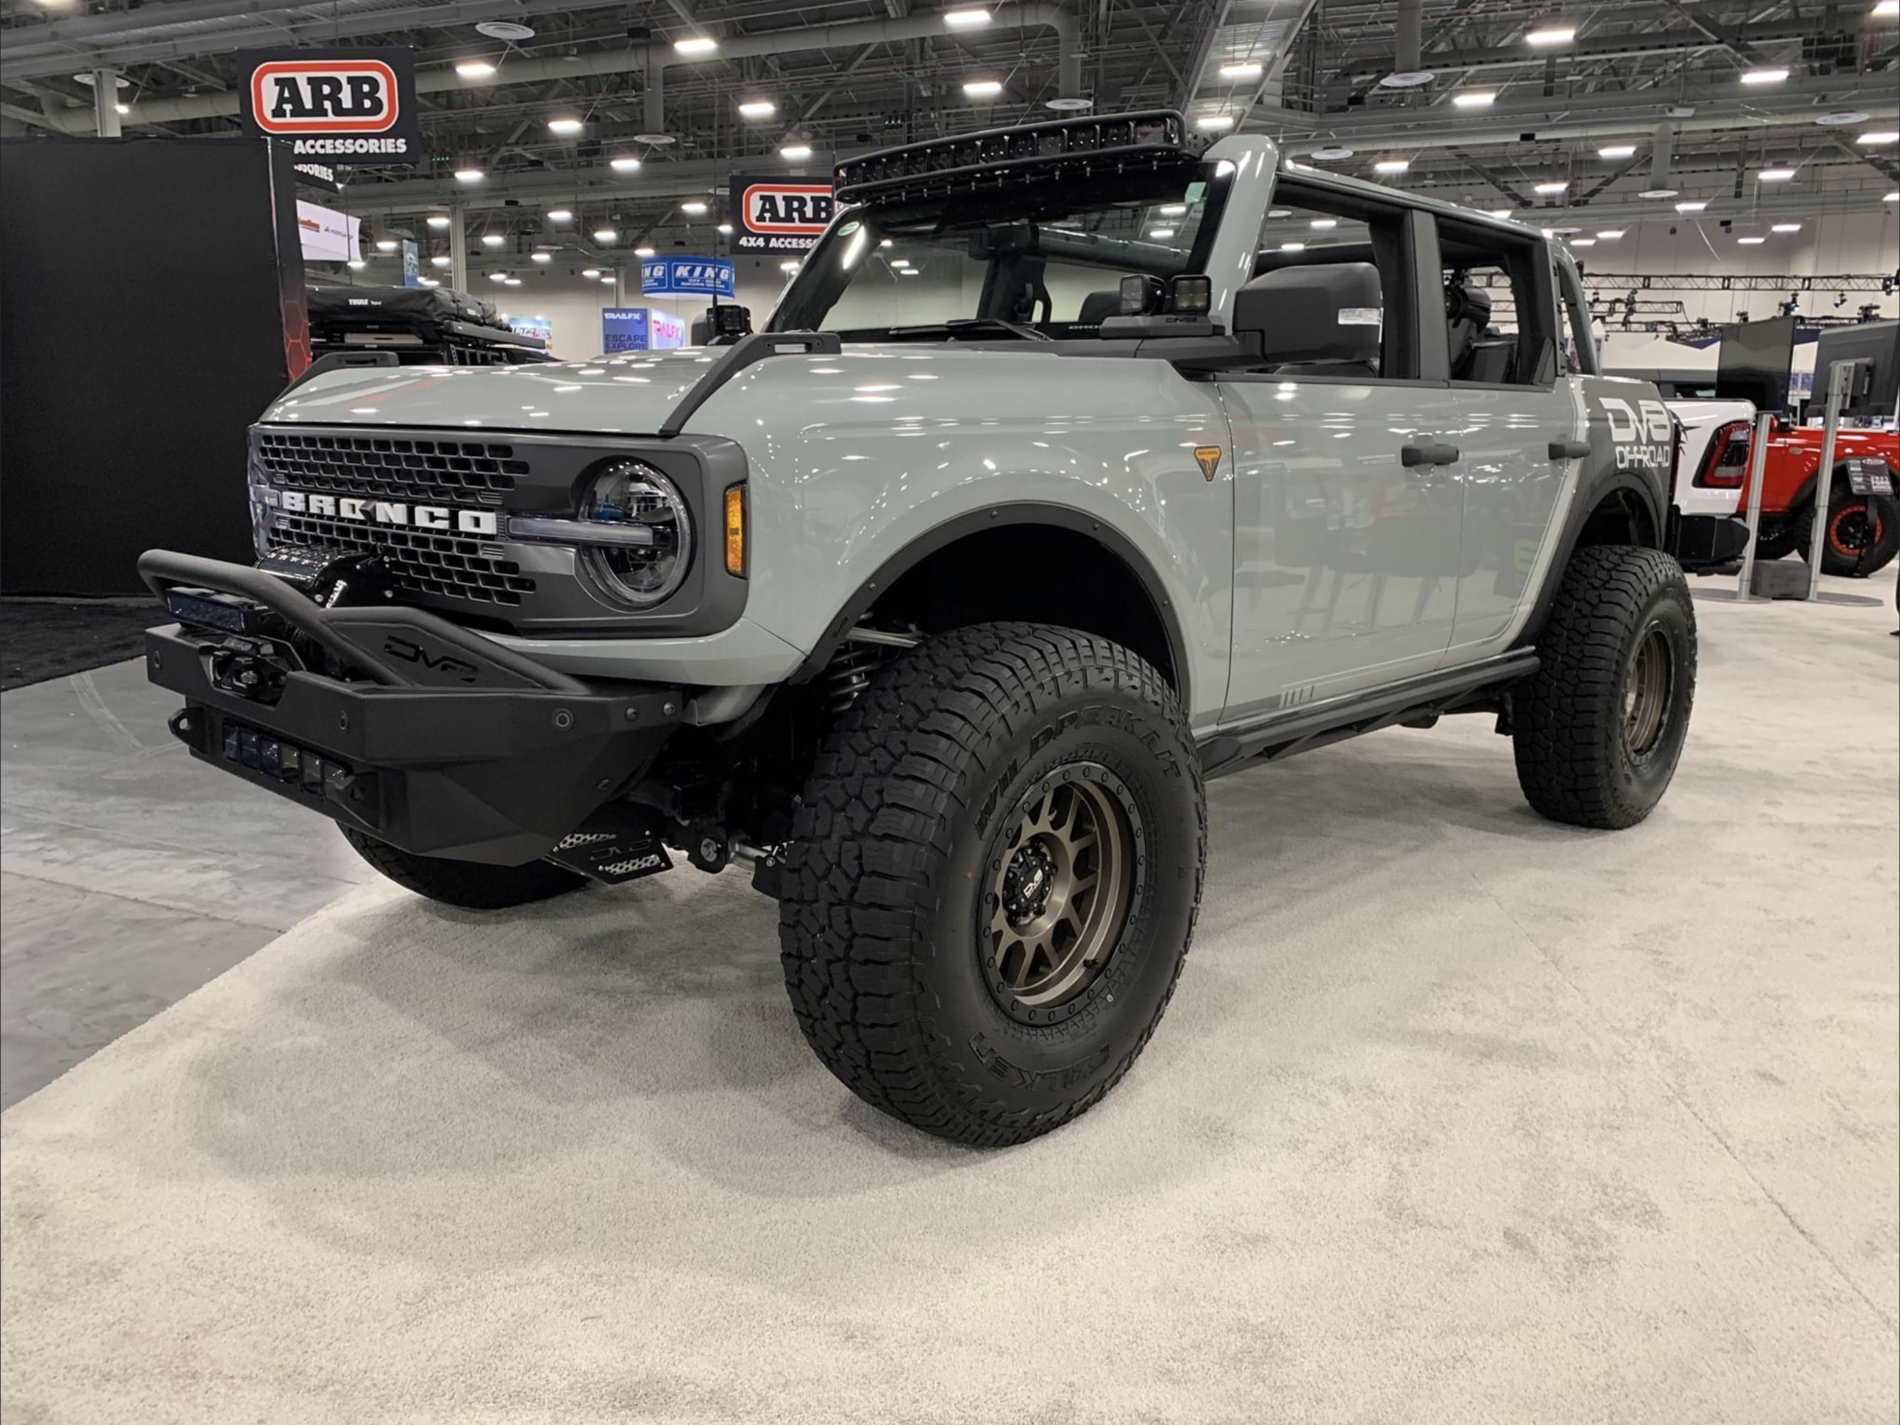 Ford Bronco Pics of (almost) all the SEMA Broncos In One Thread 29A70678-6272-4AF4-9964-09C8ACD739D7